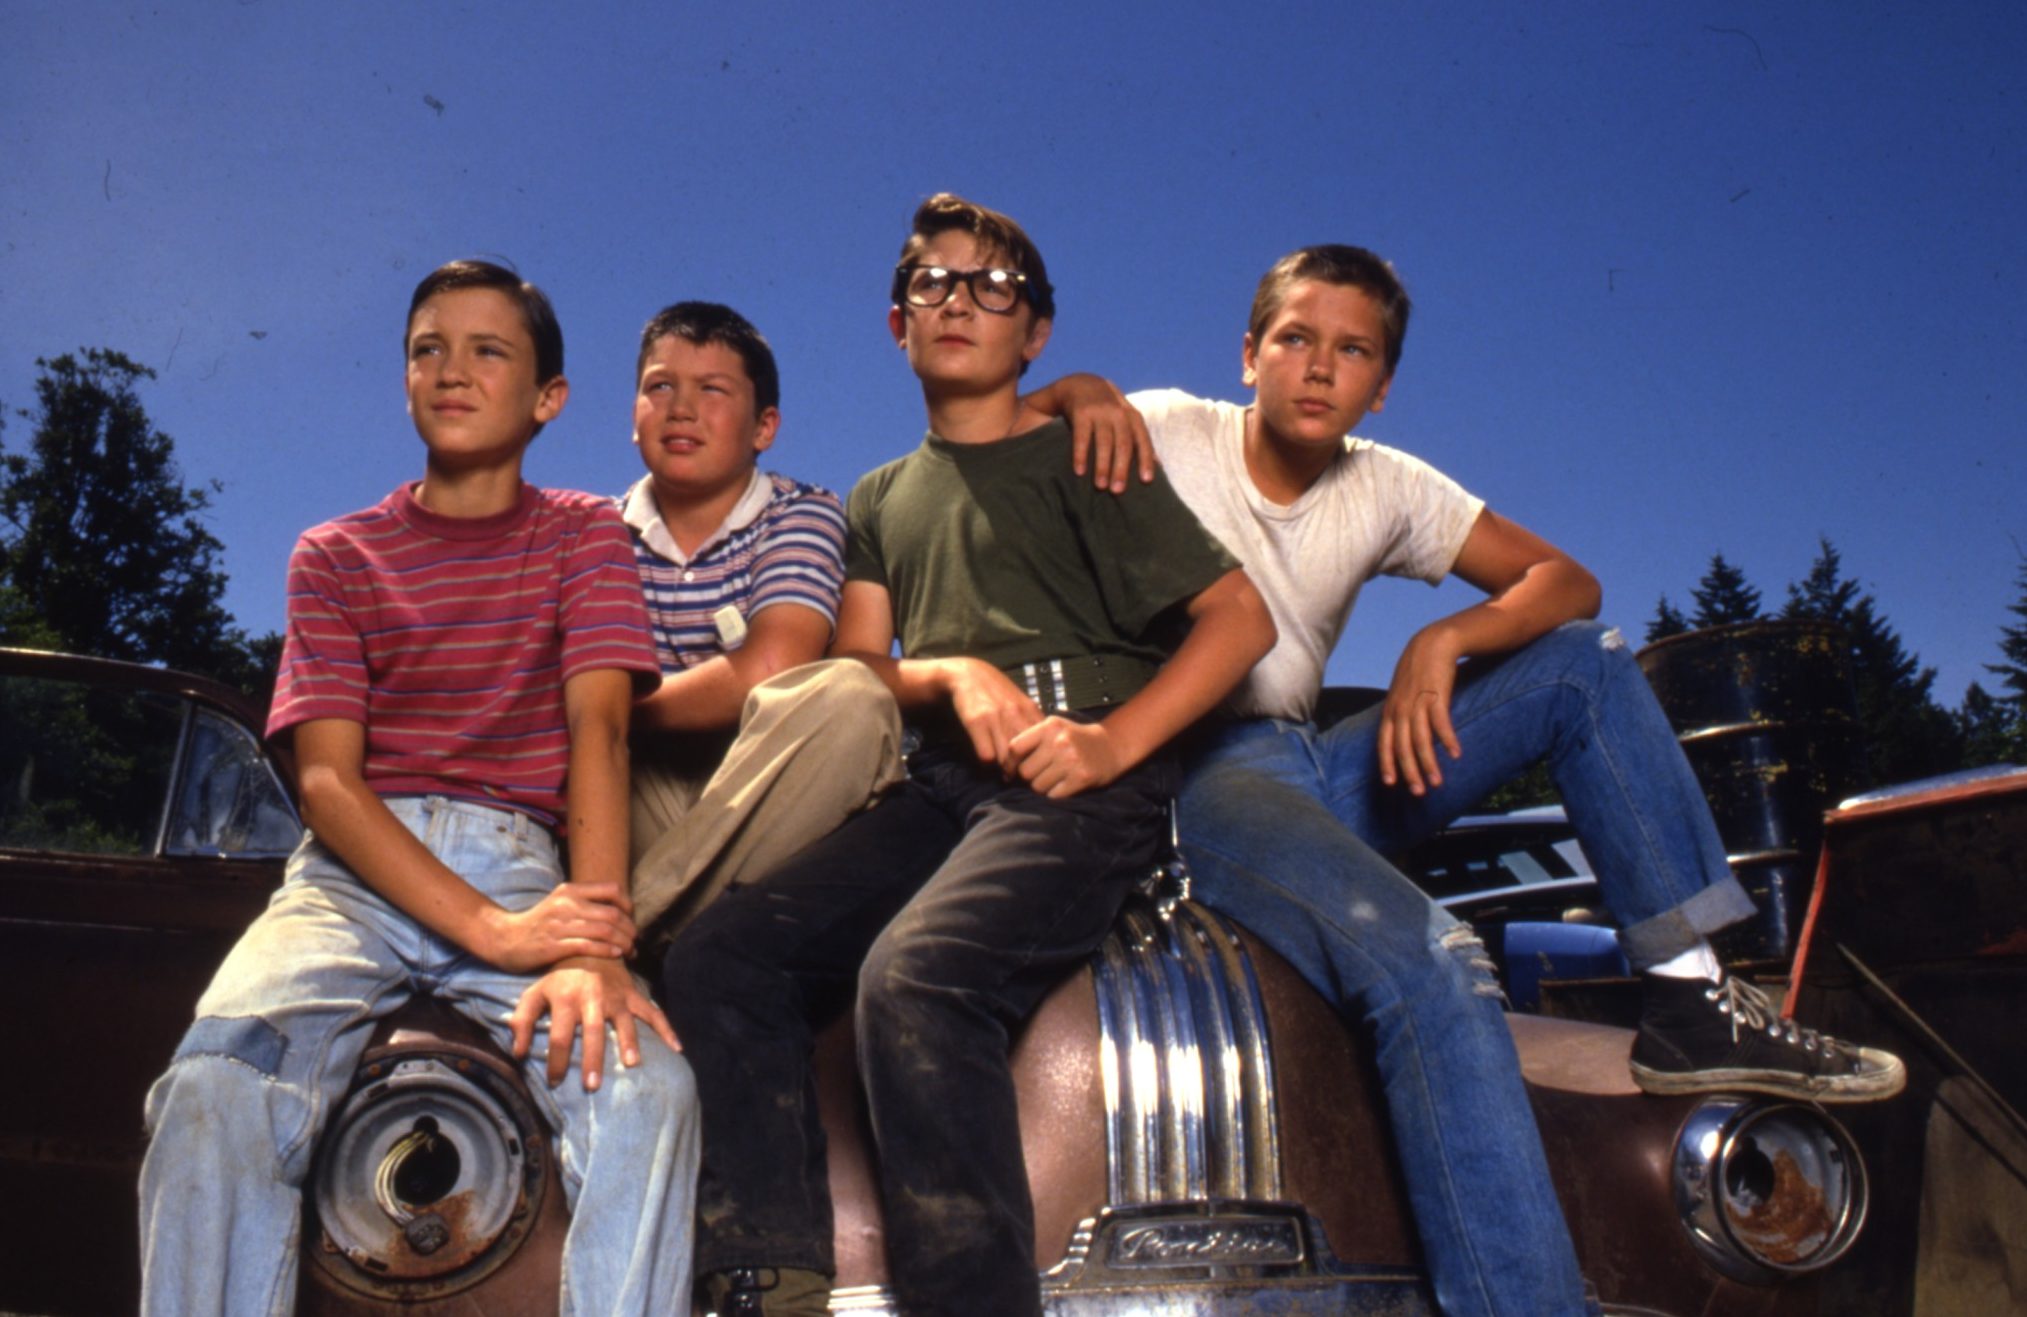 Stand by Me: The 1986 Film is Not a True Story